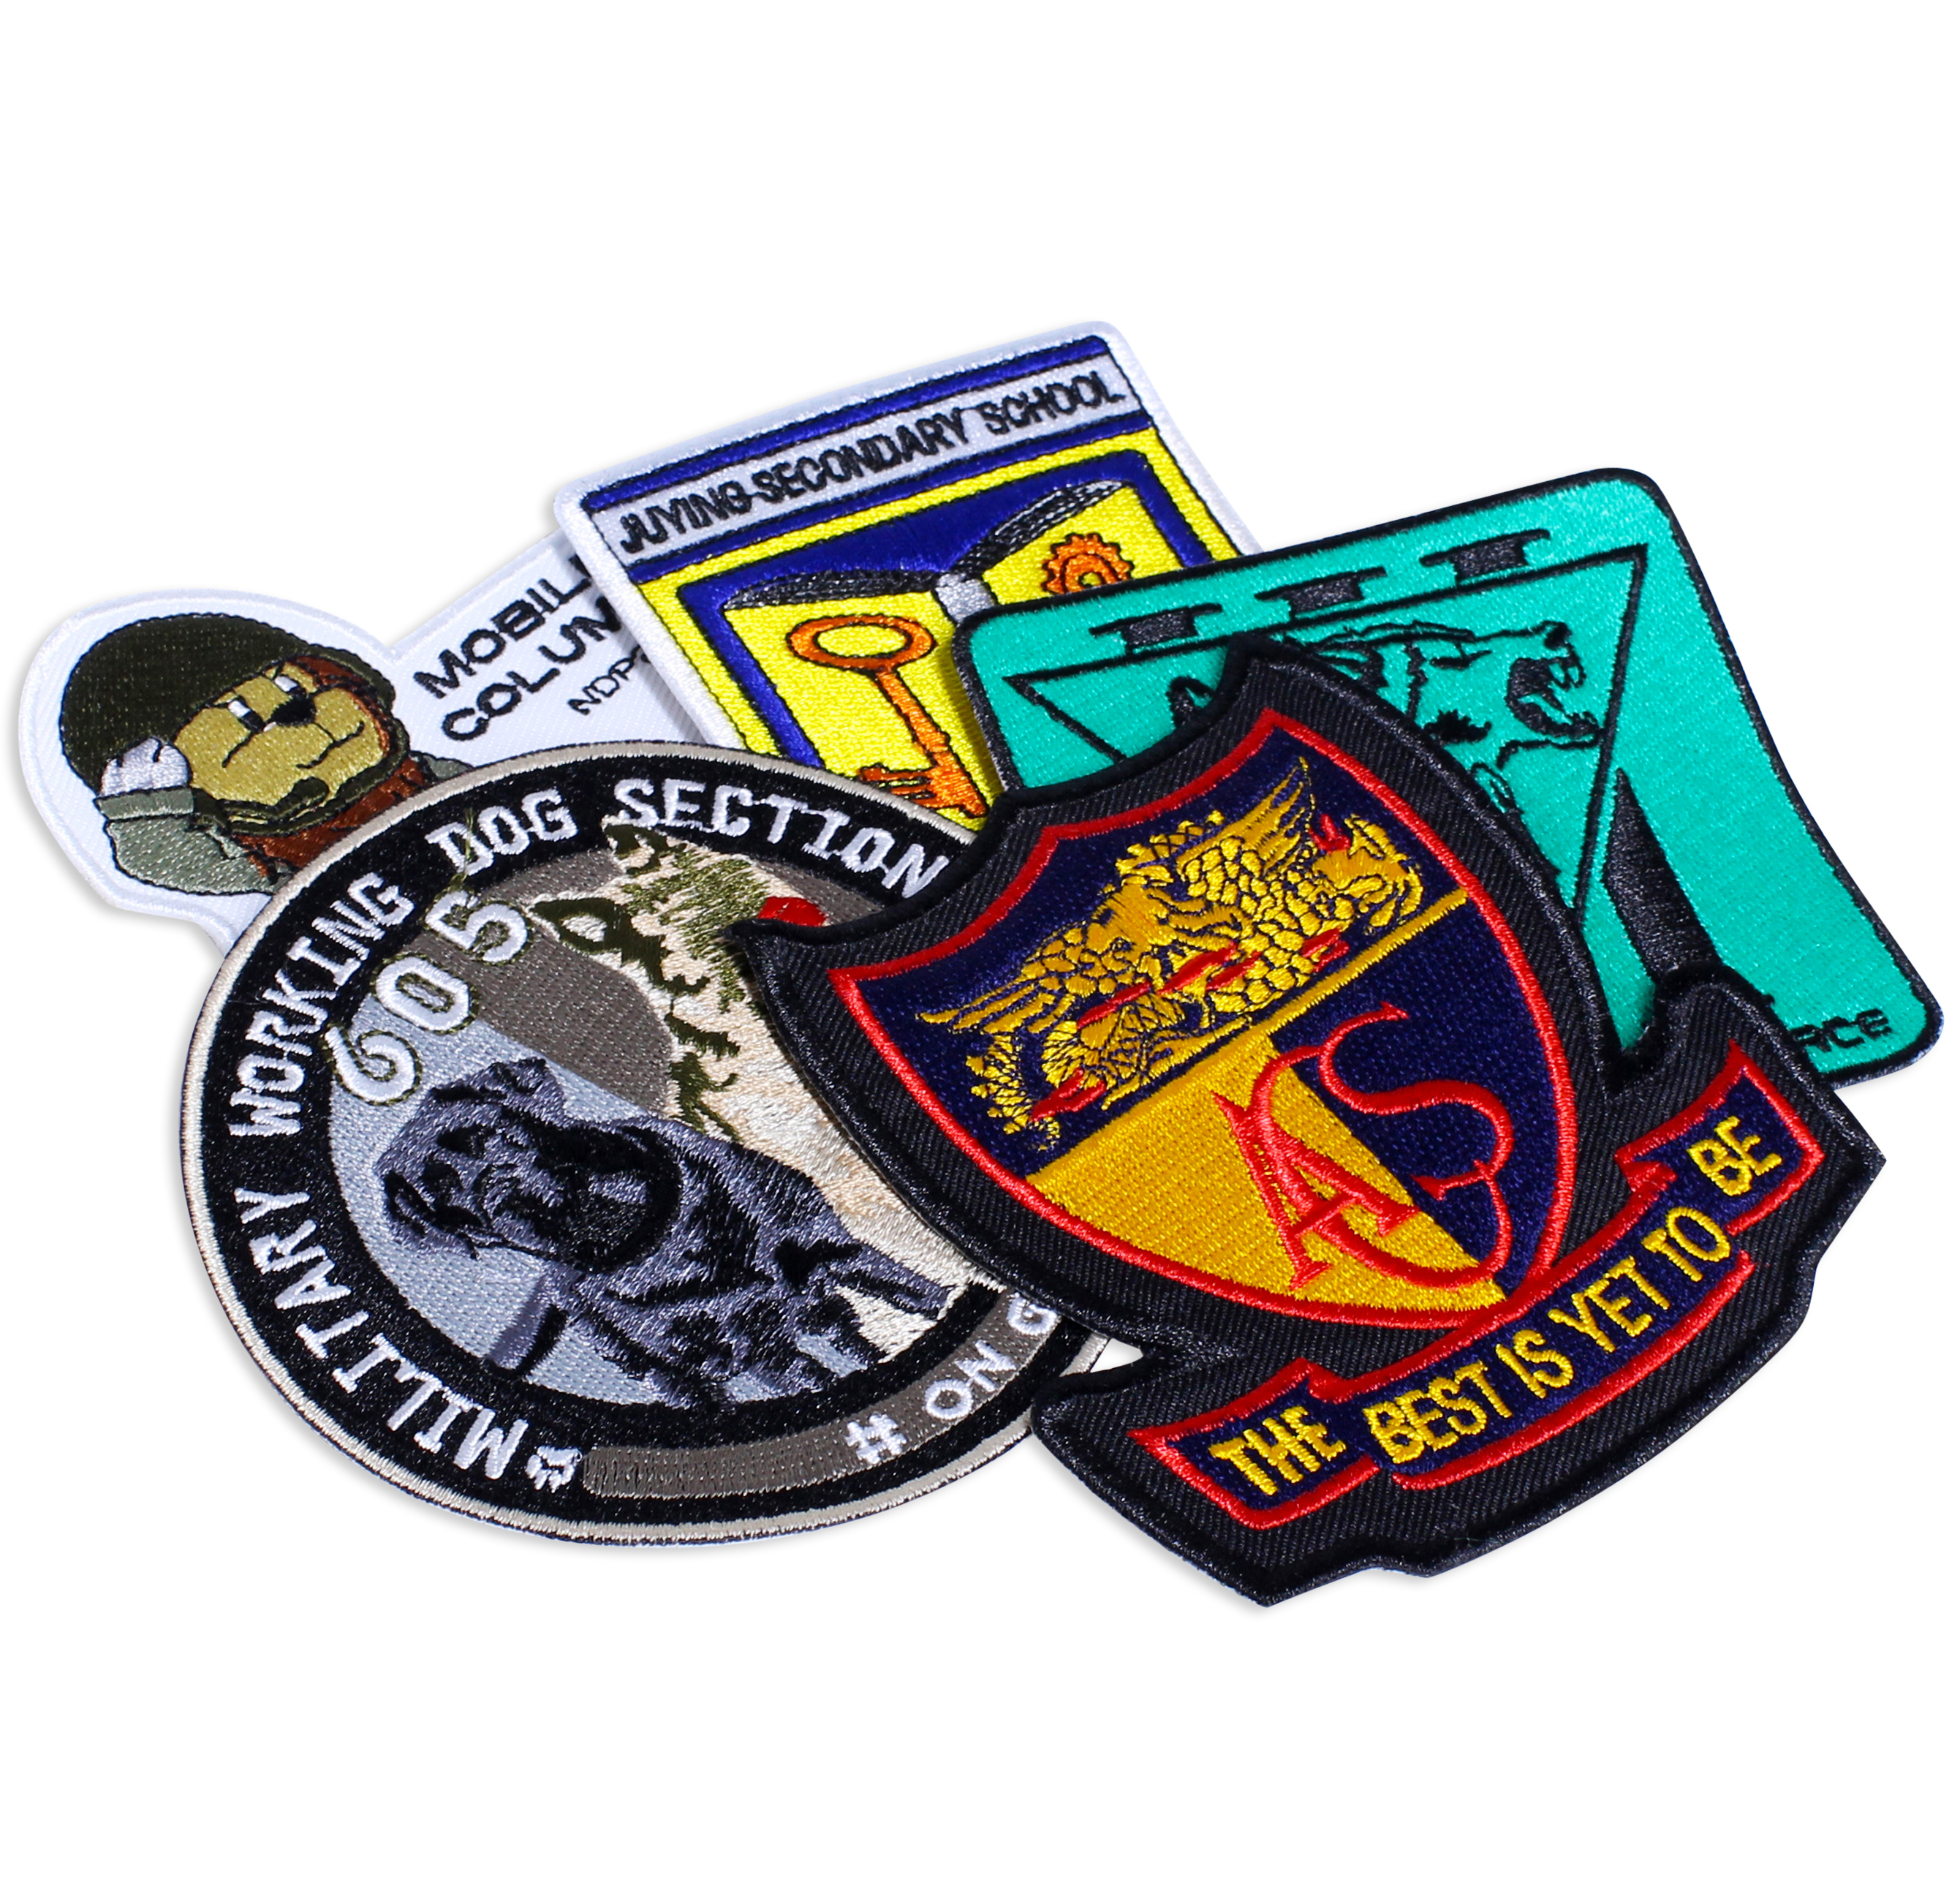 Custom Embroidery Patch Singapore, Iron On & Velcro Patches